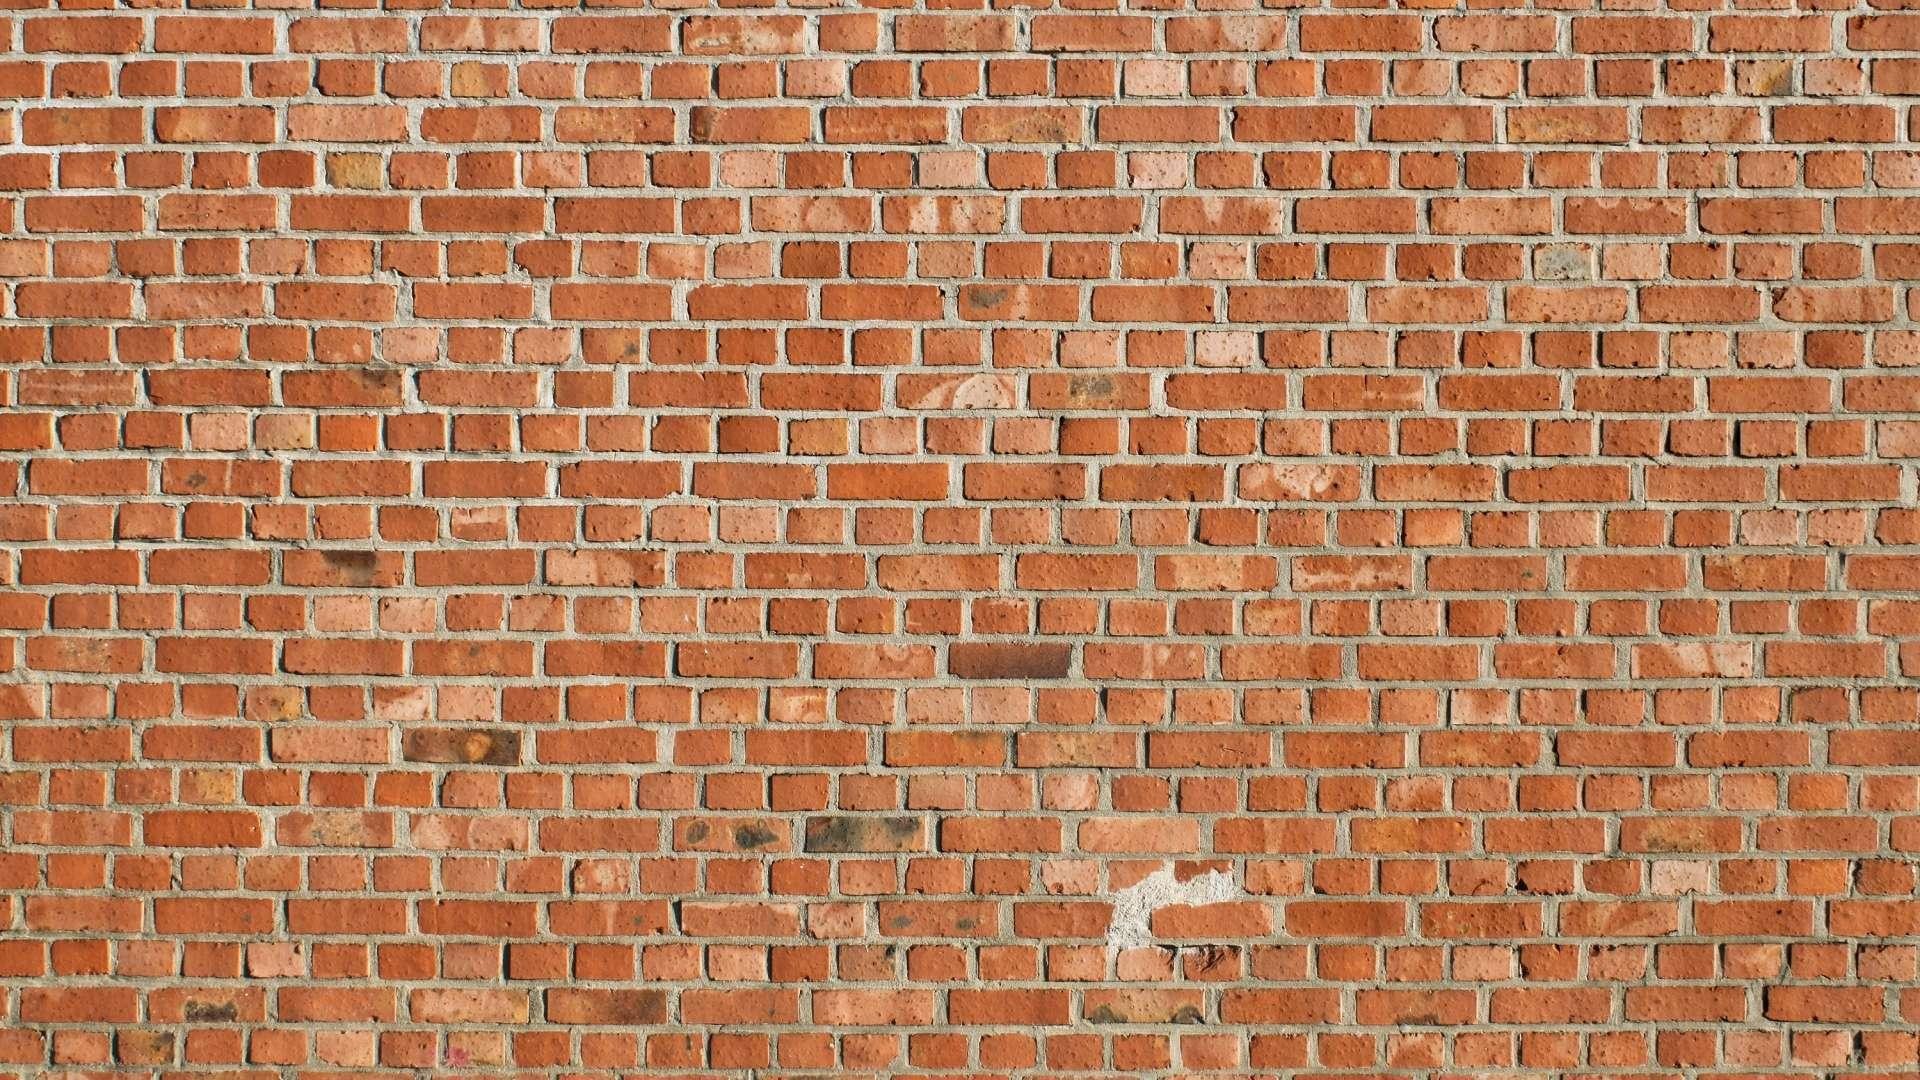 HD Brick Wallpaper With high-resolution 1920X1080 pixel. You can use and set as background for your Mac Desktop Background, Windows Screensavers, iPhone Wallpapers, Tablet or Android Lock screen and another Smartphone